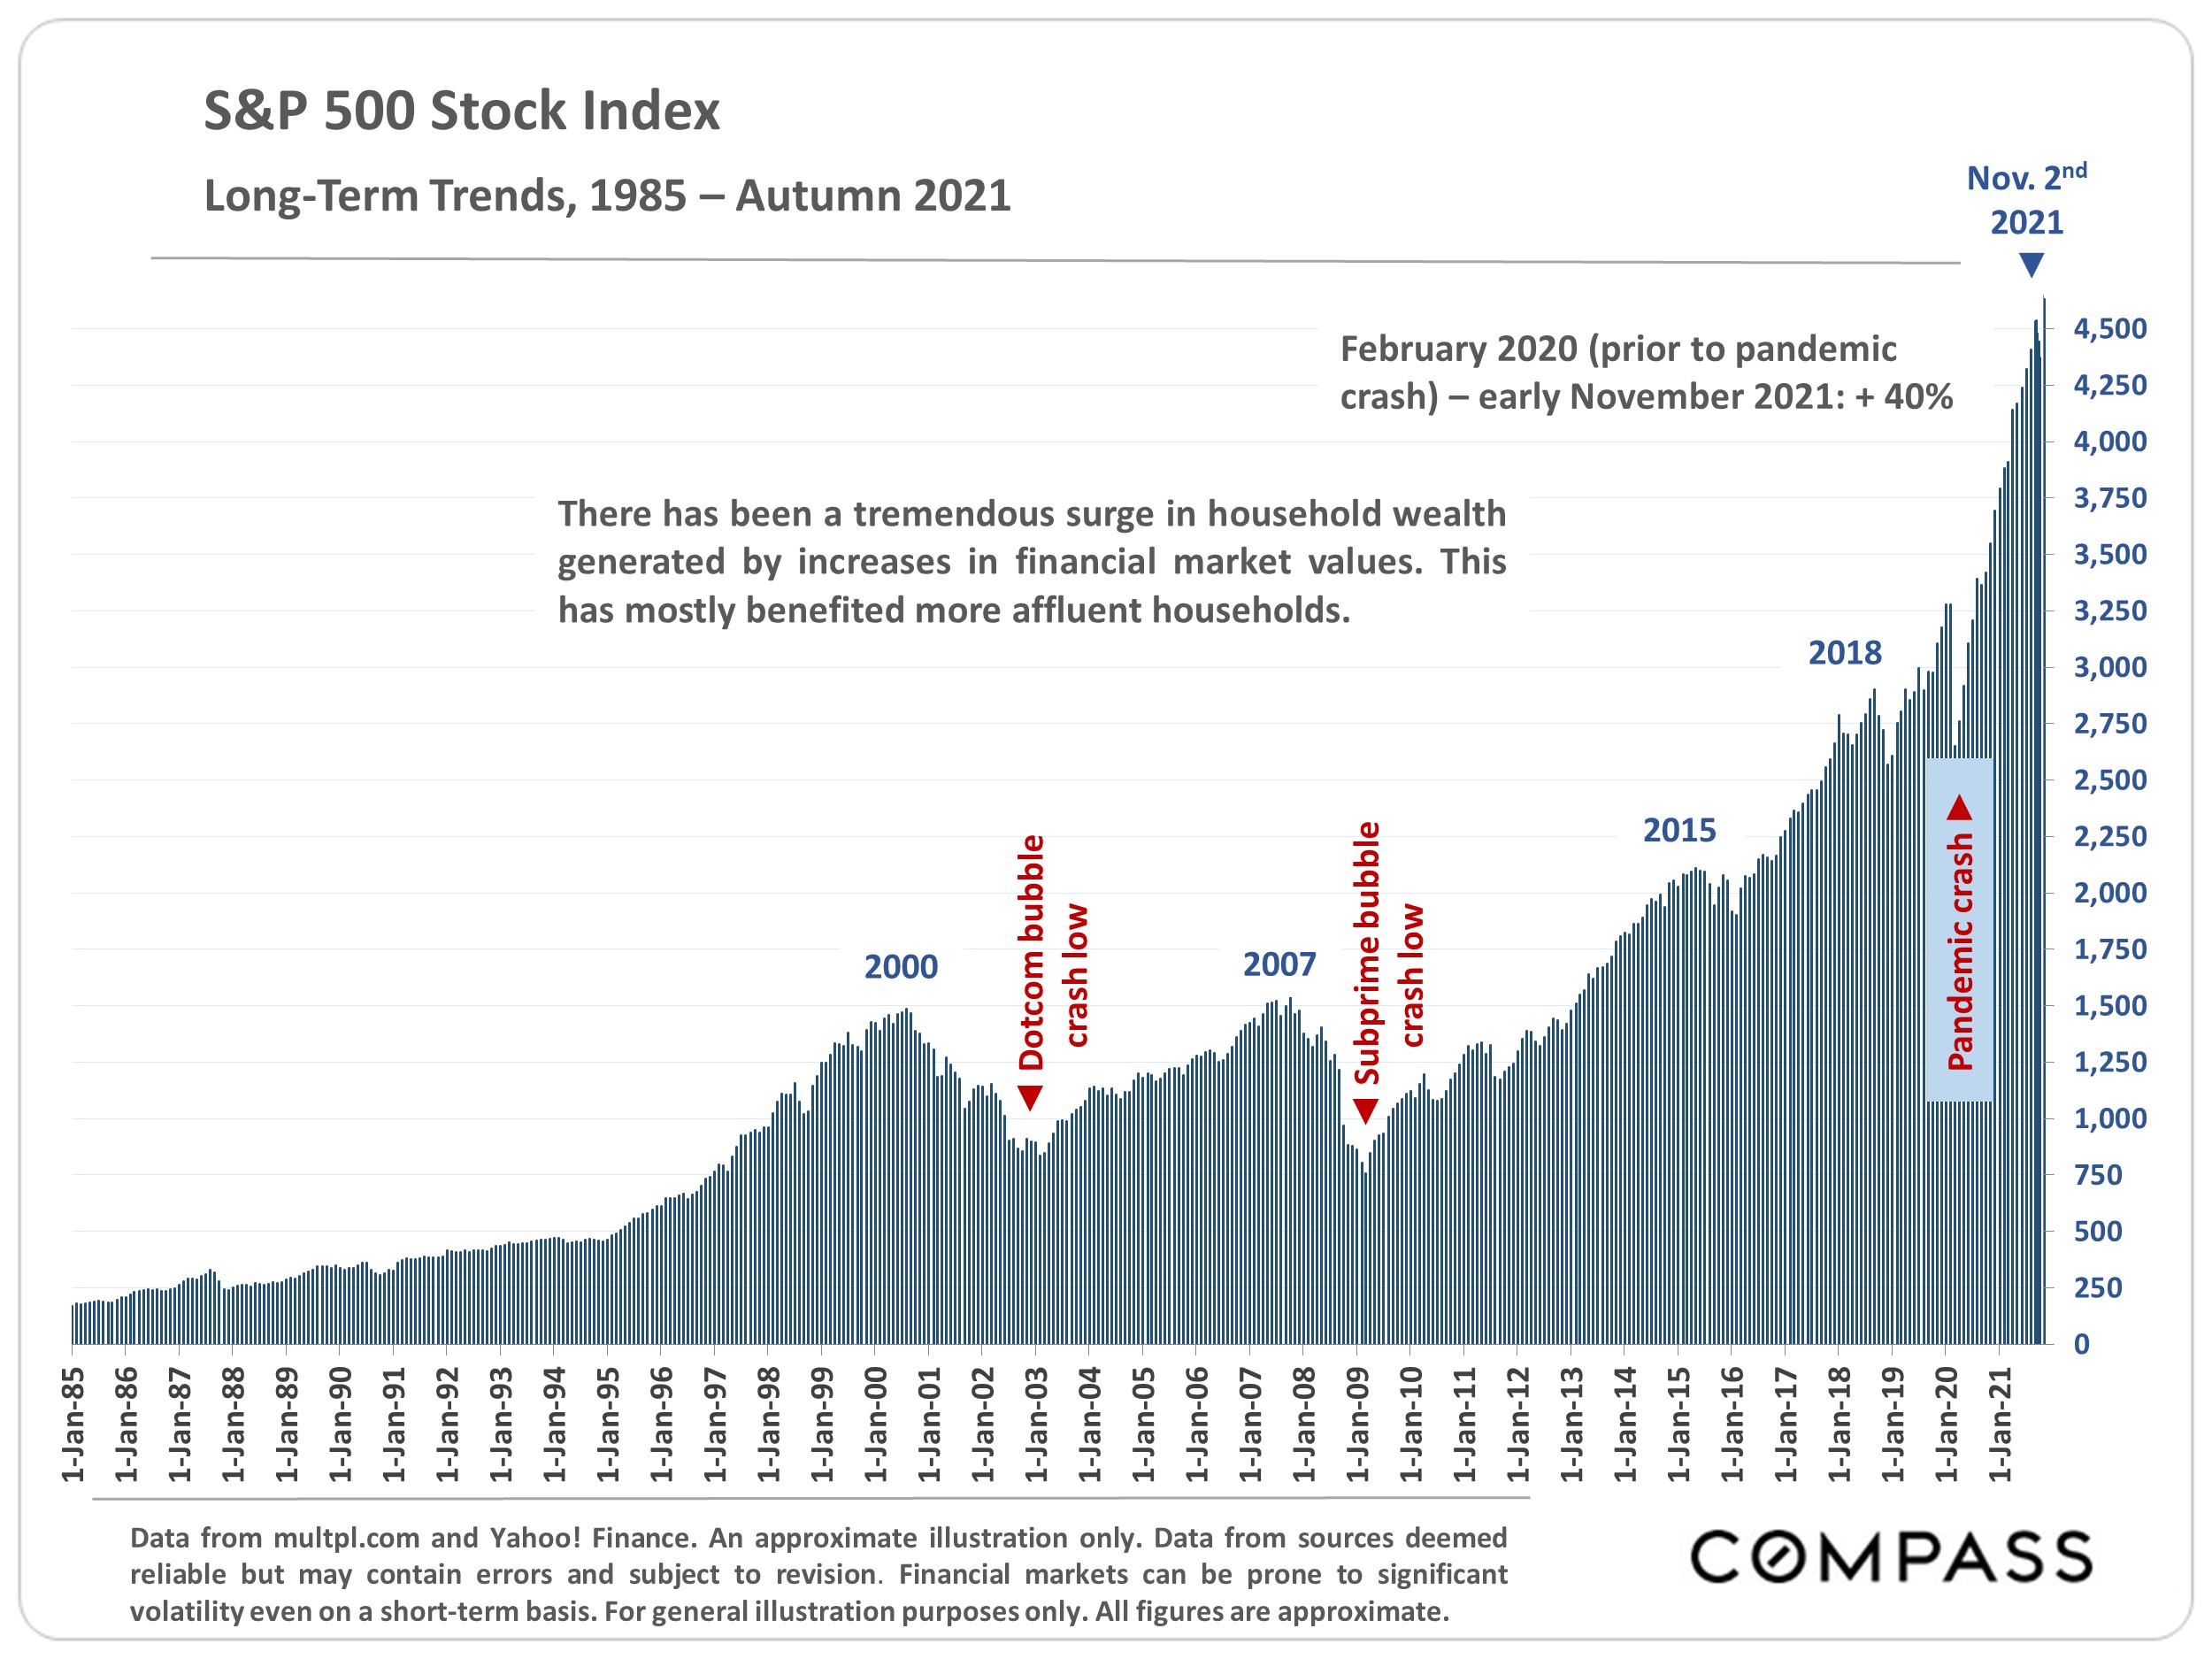 bar graph of the S&P stock trends annually since 1985